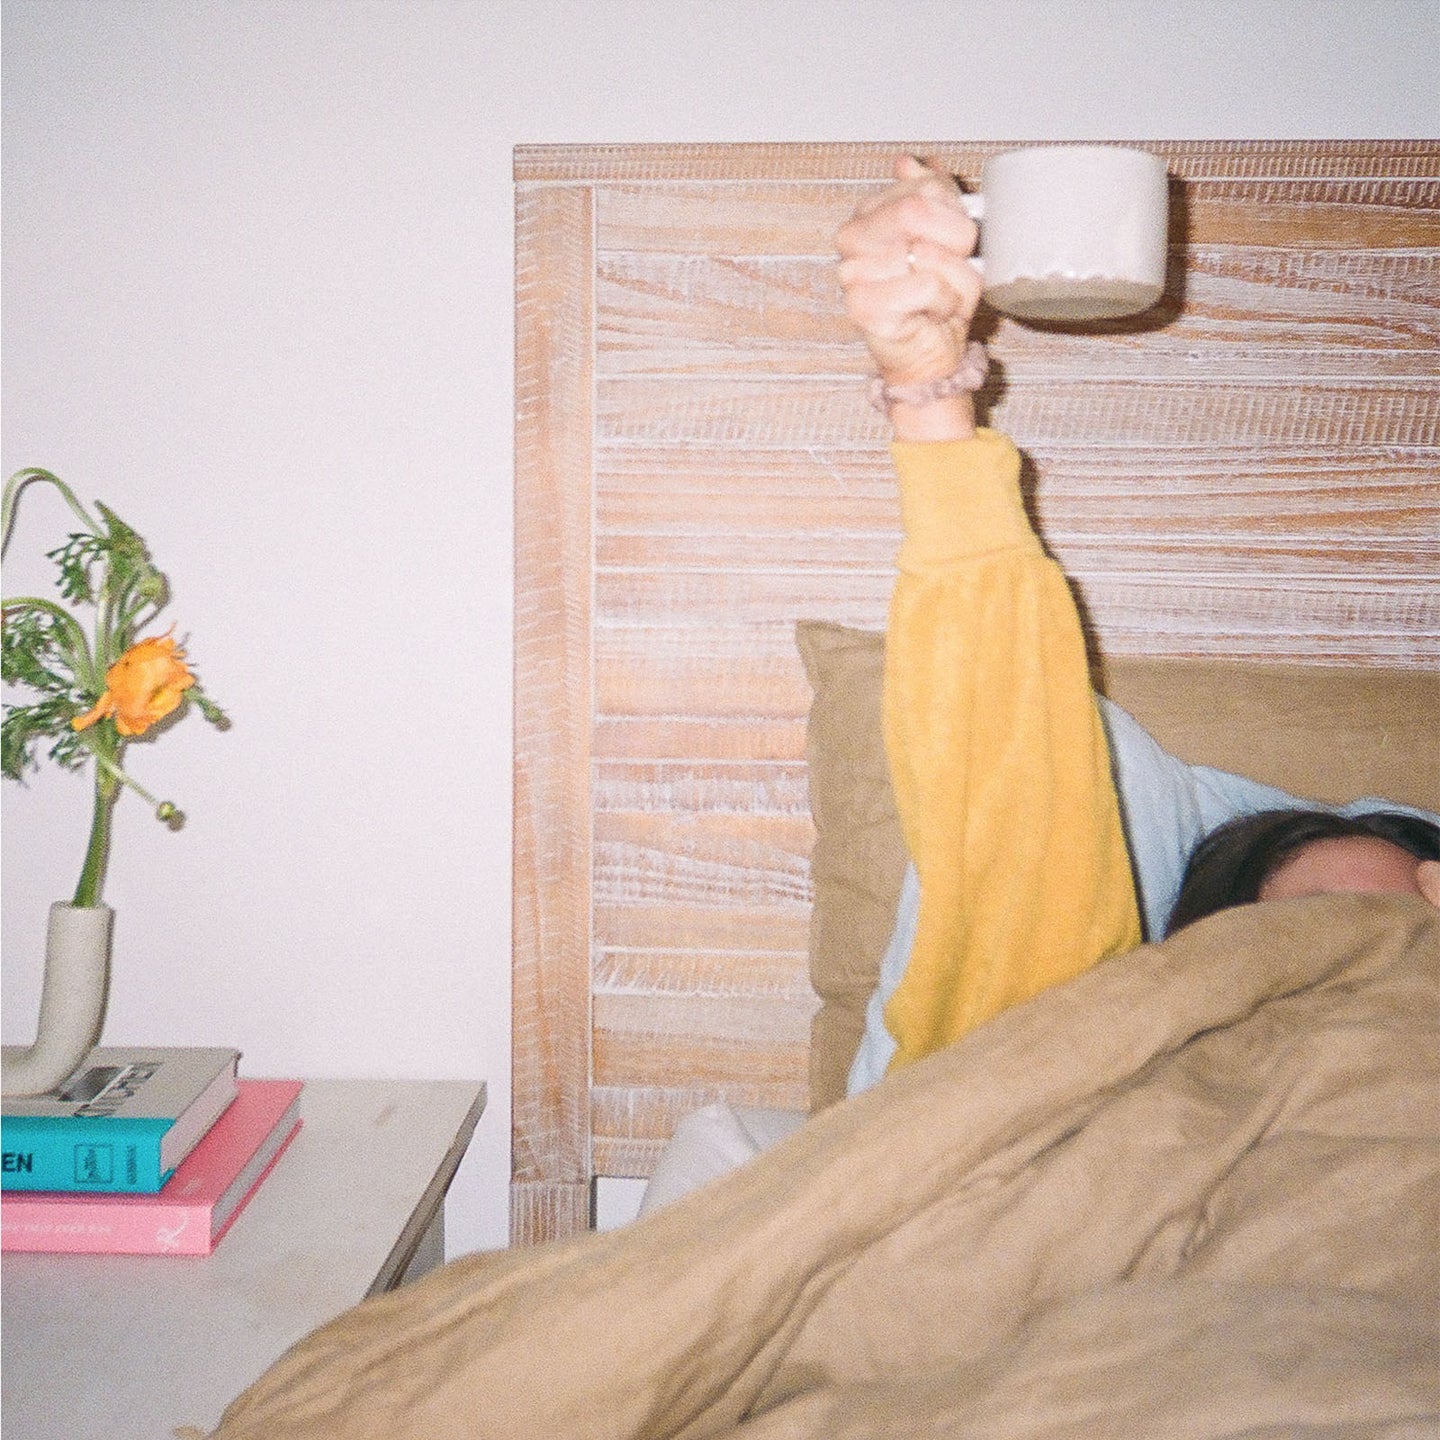 A girl raising a cup of a latte in the bed